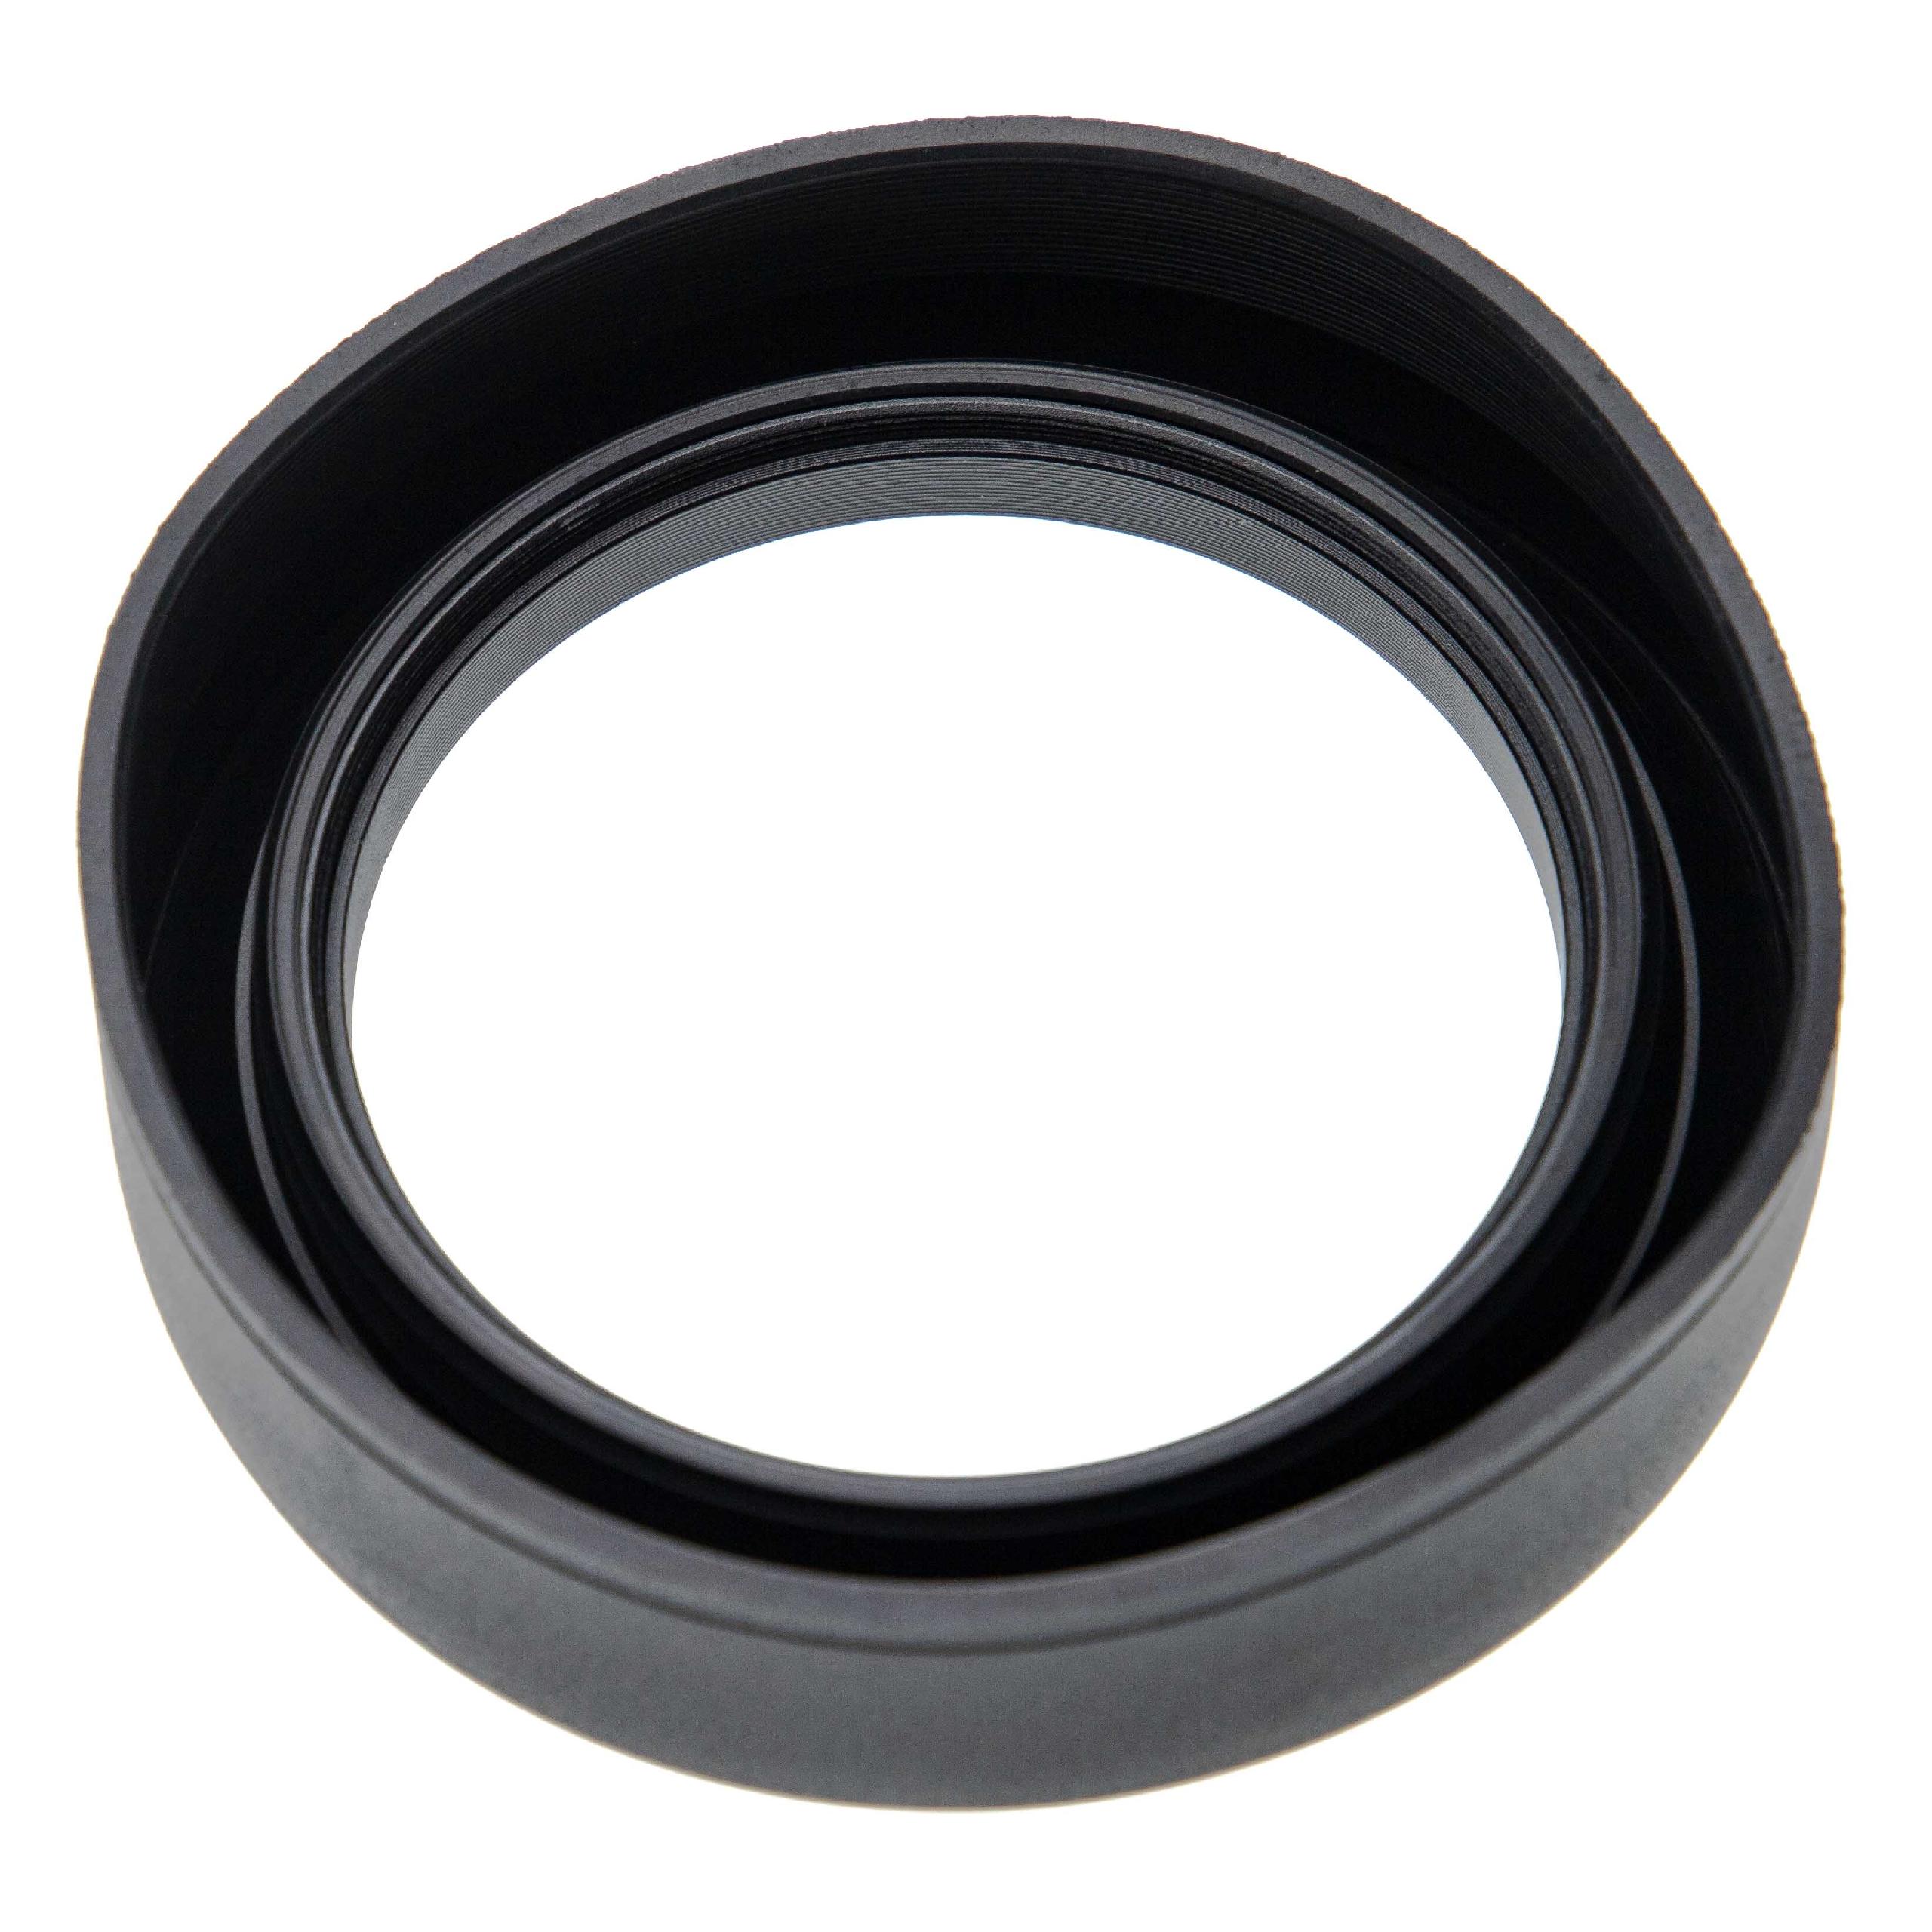 Lens Hood suitable for 82mm Lens - Foldable Lens Shade, with Filter Thread Black, Round, 27 - 56 cm